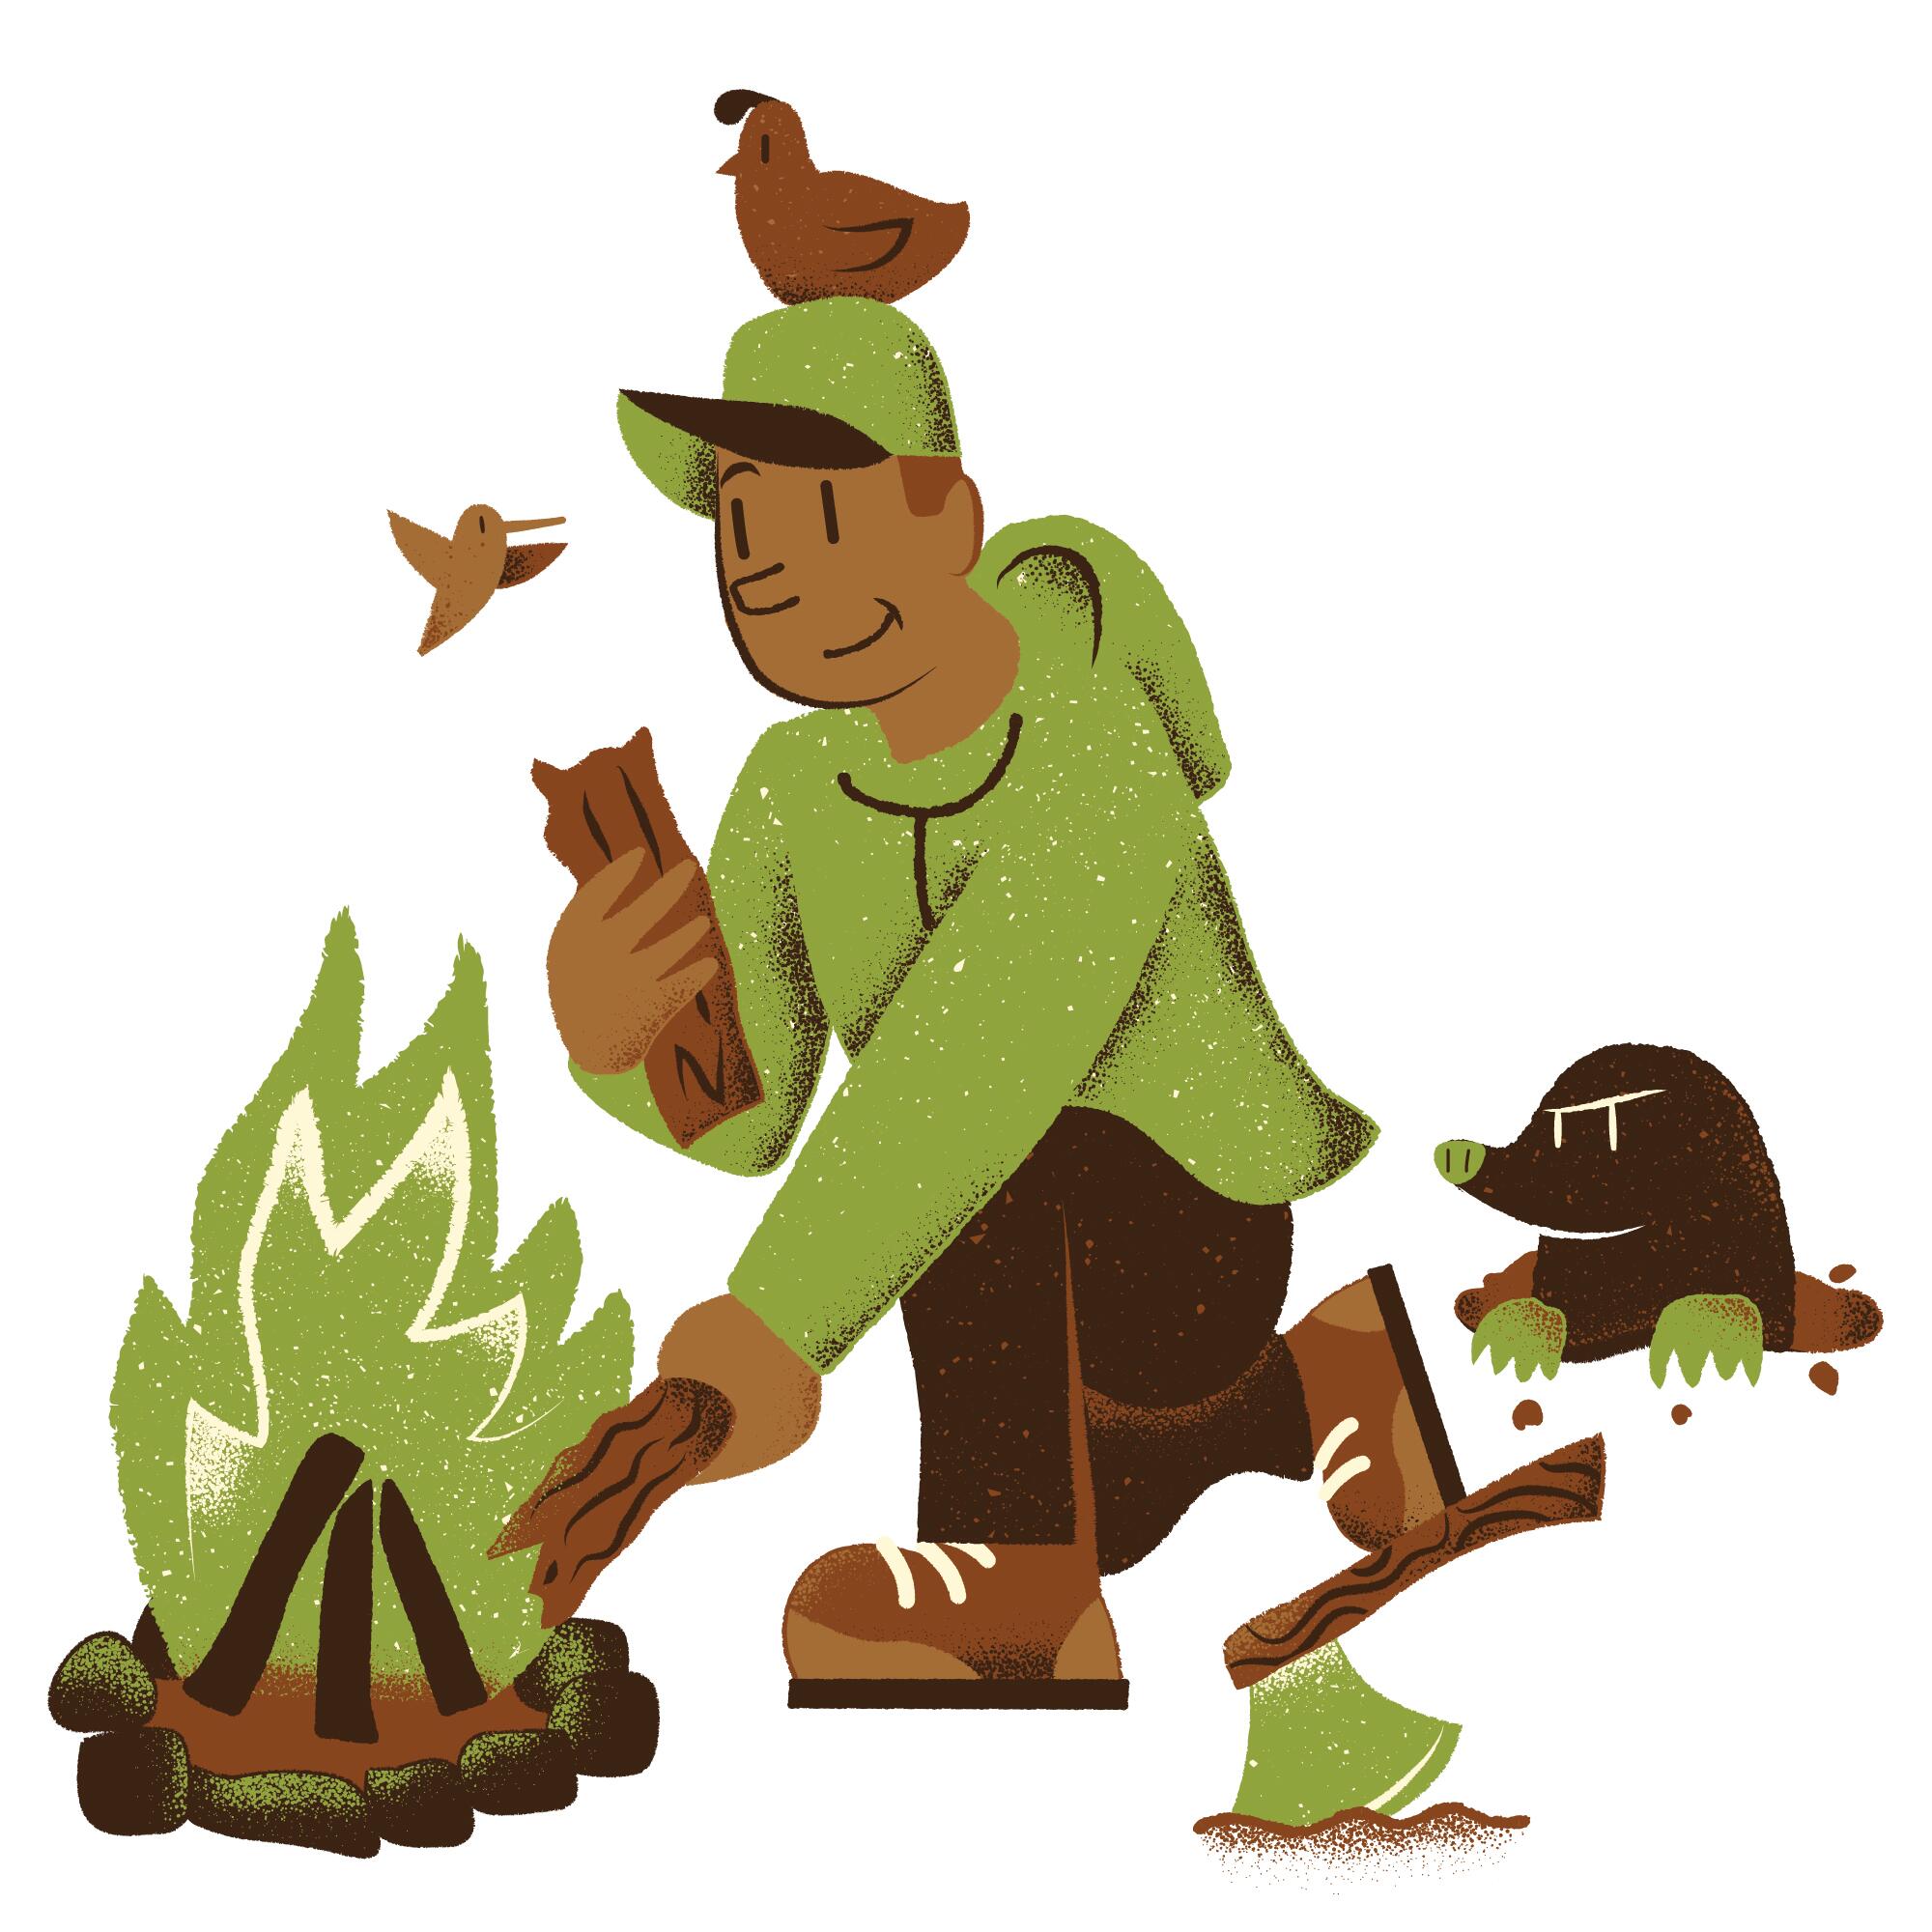 Illustration of a figure putting wood on a fire. Birds on his head/shoulder while a mole looks on.